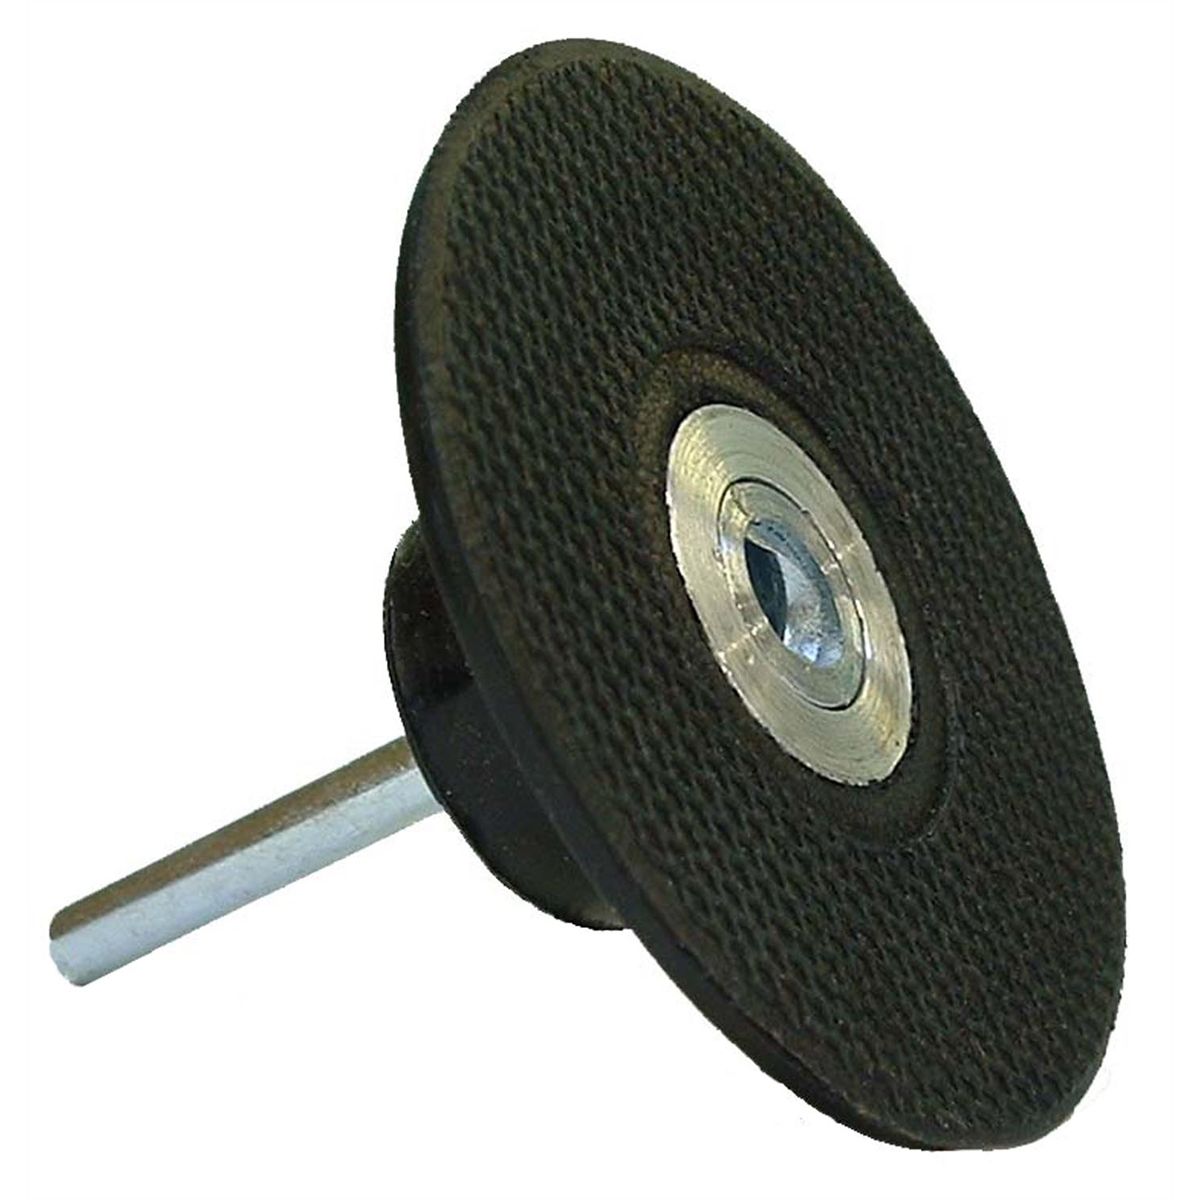 2" Holding Pad for Surface Treatment Disc